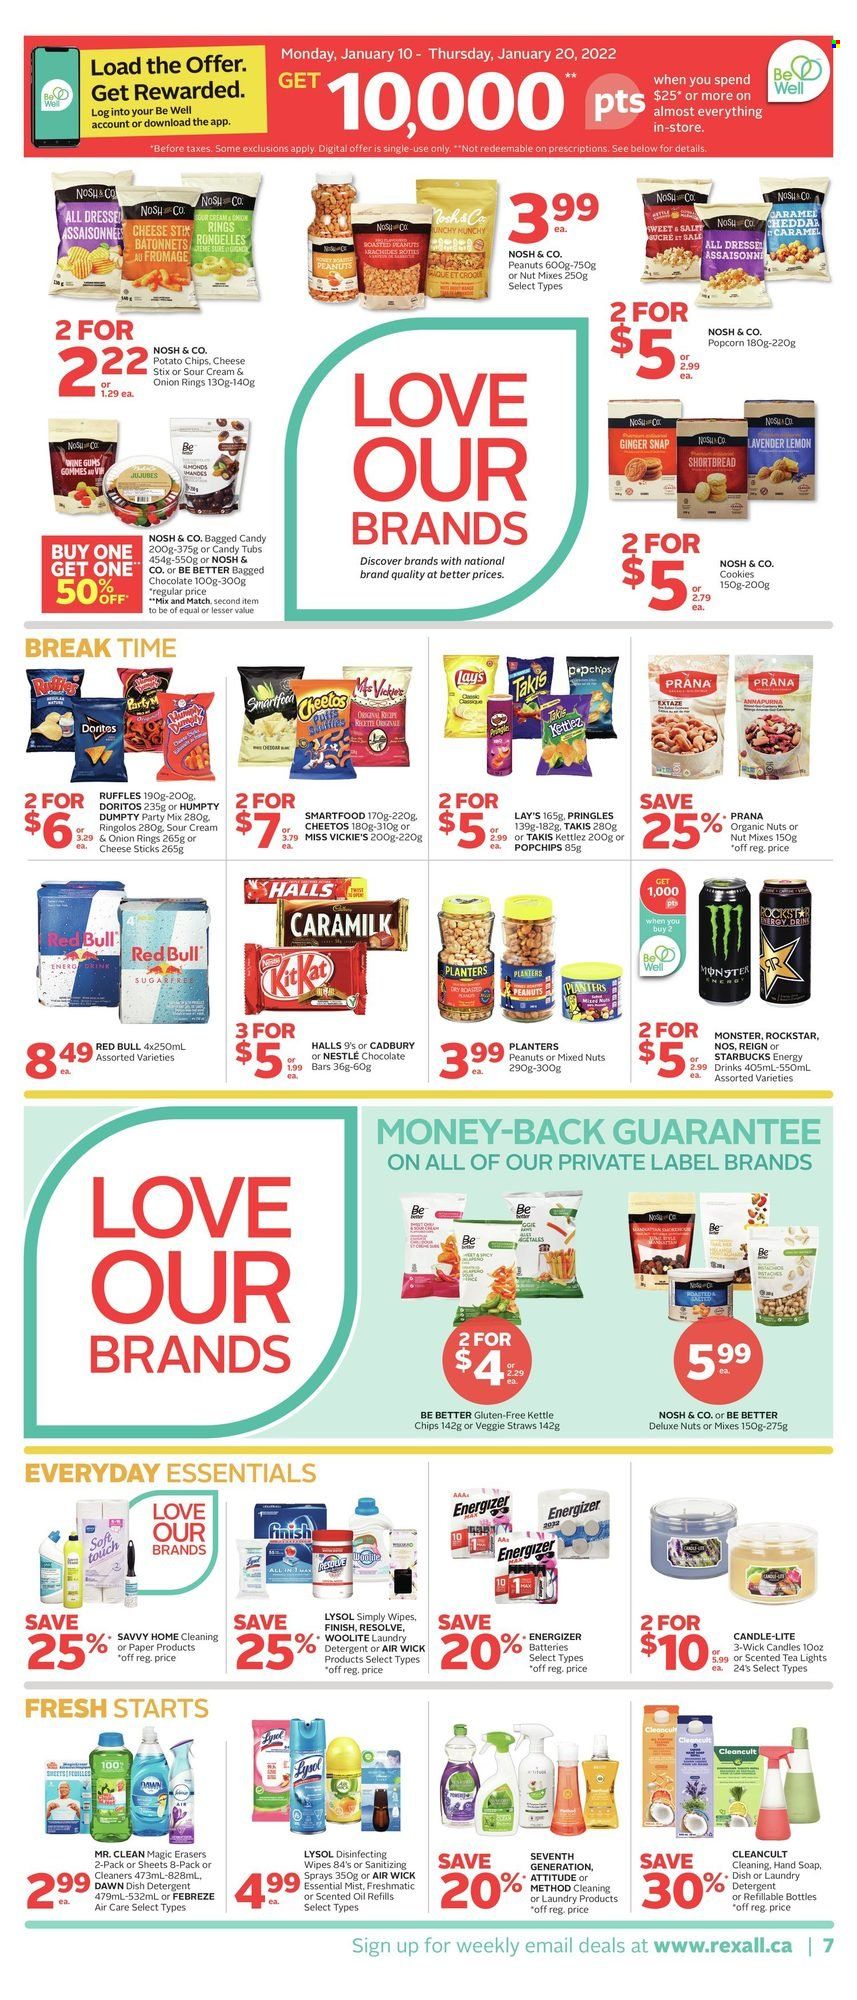 thumbnail - Rexall Flyer - January 07, 2022 - January 20, 2022 - Sales products - cookies, Halls, chocolate, Cadbury, Doritos, potato chips, Pringles, Cheetos, onion rings, Lay’s, Smartfood, popcorn, veggie straws, Ruffles, ginger, caramel, oil, peanuts, mixed nuts, Planters, Monster, Red Bull, Rockstar, tea, Starbucks, wipes, Febreze, Lysol, hand soap, soap, candle, Air Wick, scented oil, Nestlé, detergent, Energizer, chips. Page 7.